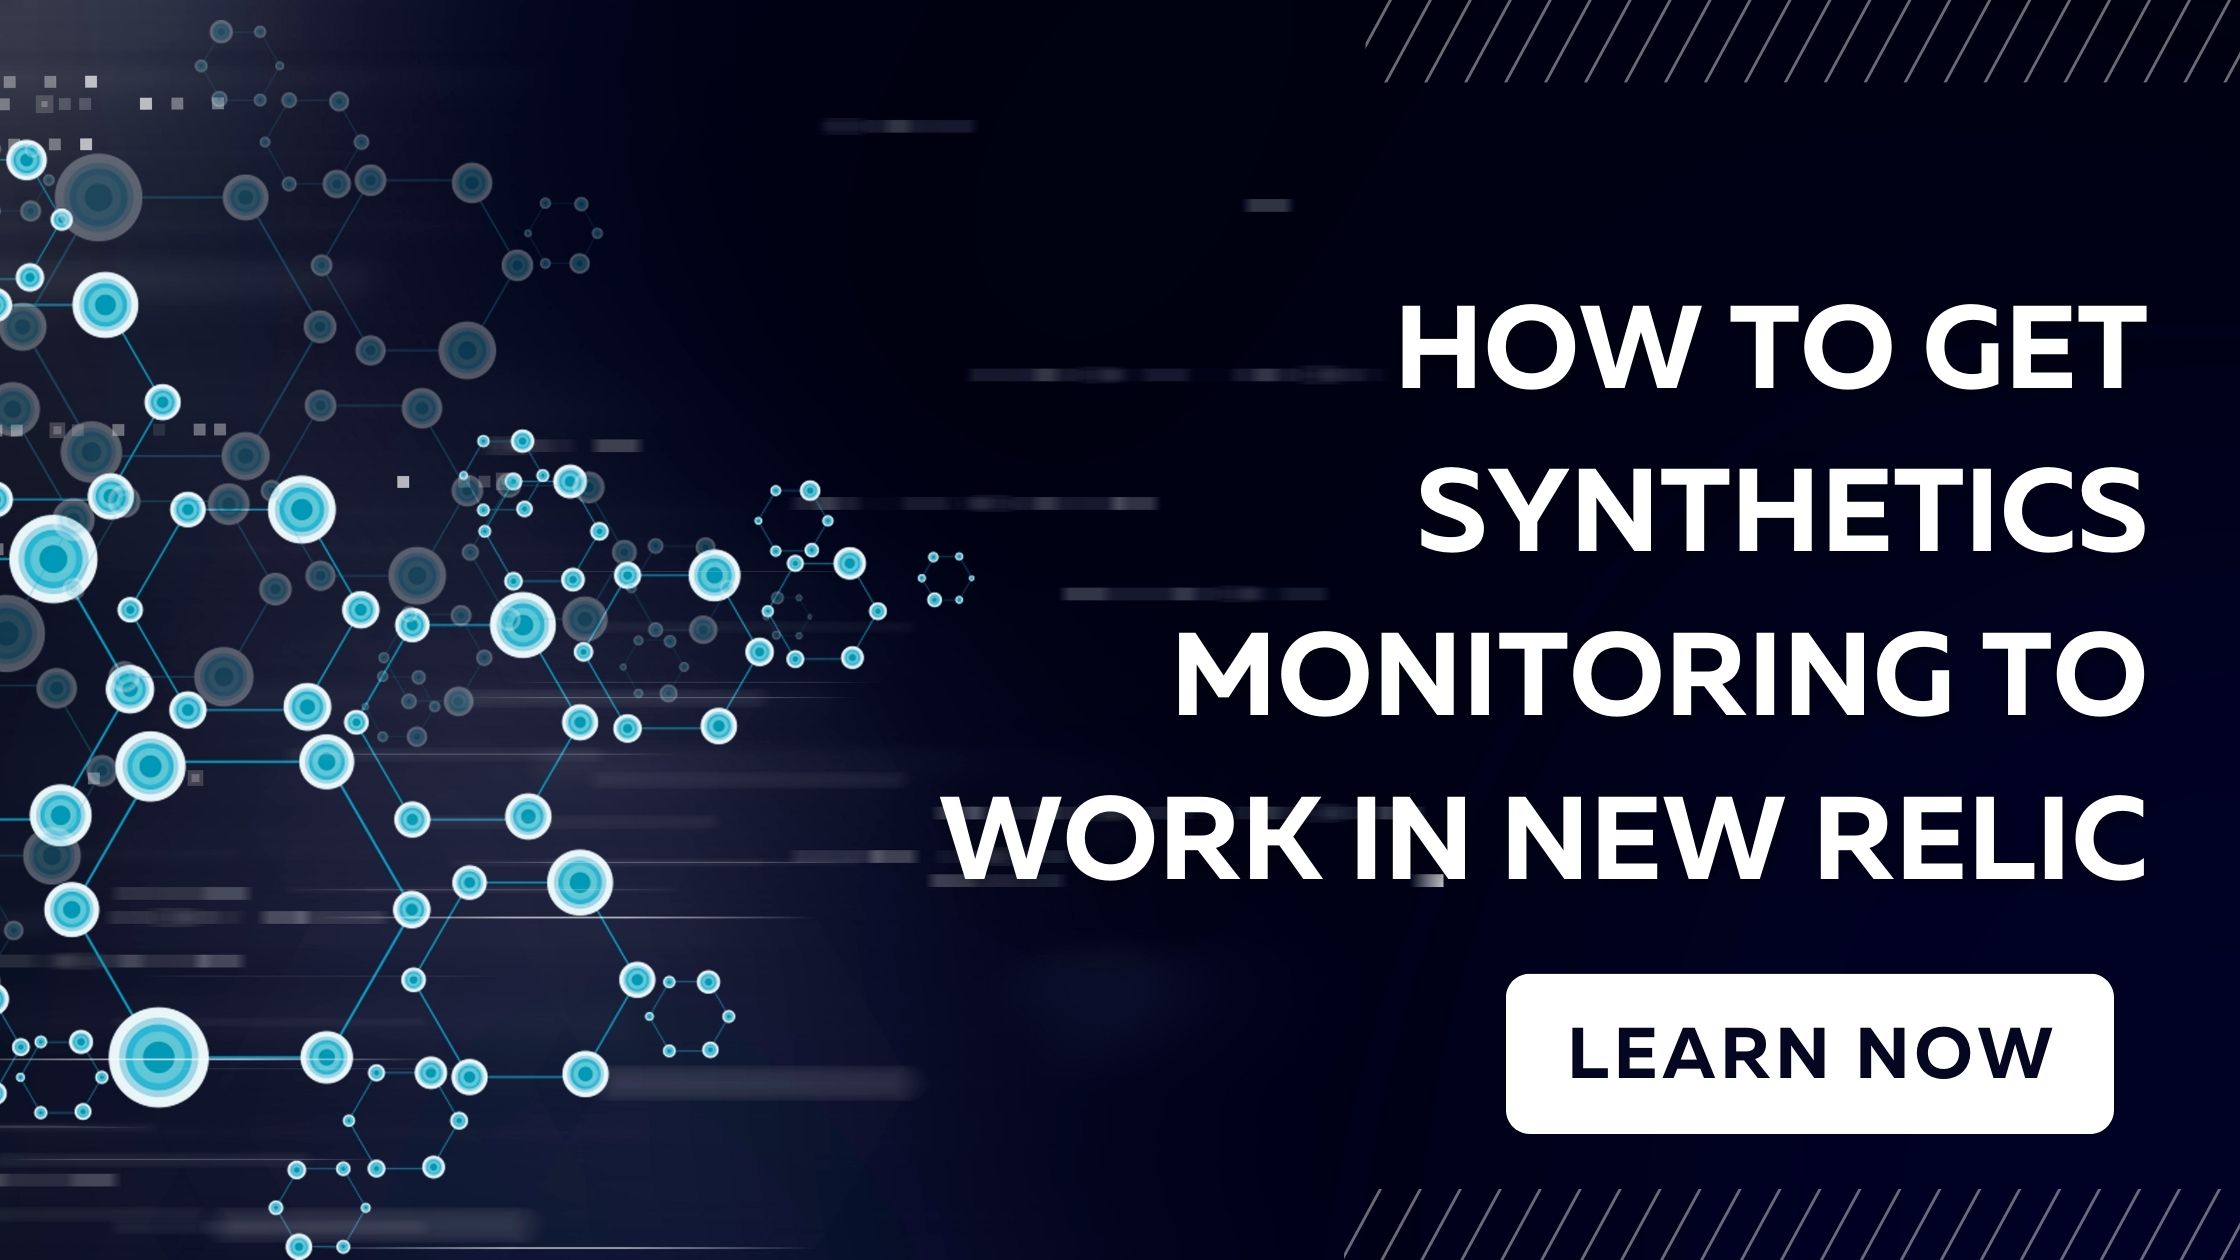 How to get Synthetic Monitoring to work in New Relic?